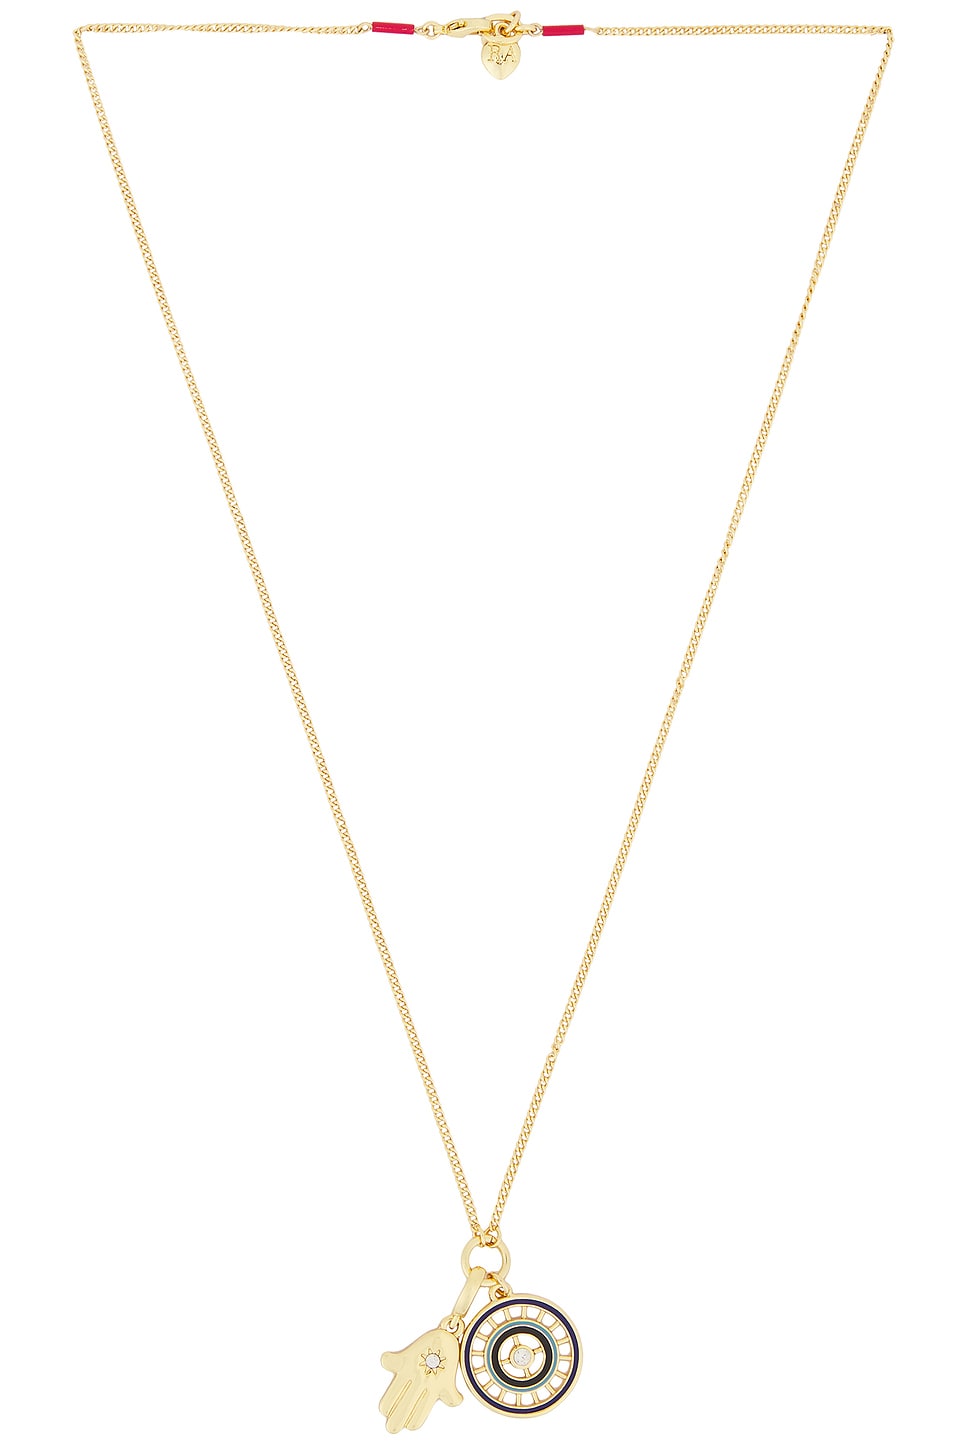 Image 1 of Roxanne Assoulin The Care & Protect Charm Necklace in Gold